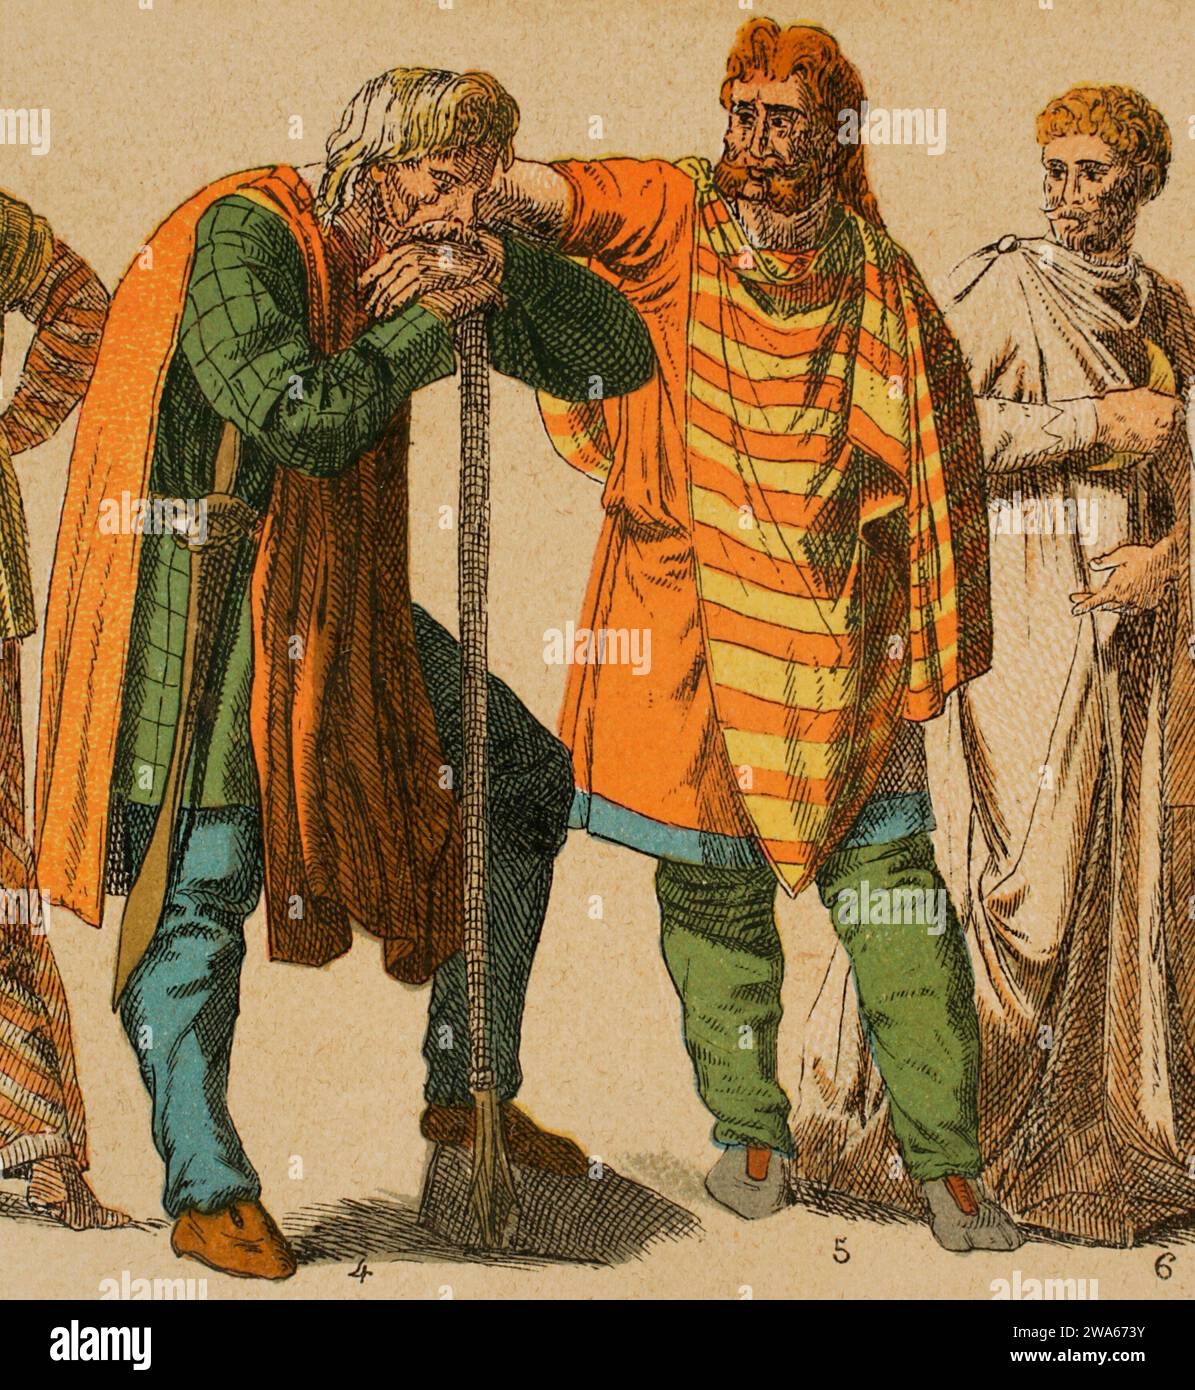 Gauls. From left to right: 4- warrior garment, with sword fastened with chain, 5- male costume of a person of rank, 6- Gallic priest's vestment, with sacral knife. Chromolithography. 'Historia Universal', by Cesar Canto. Volume II, 1881. Stock Photo